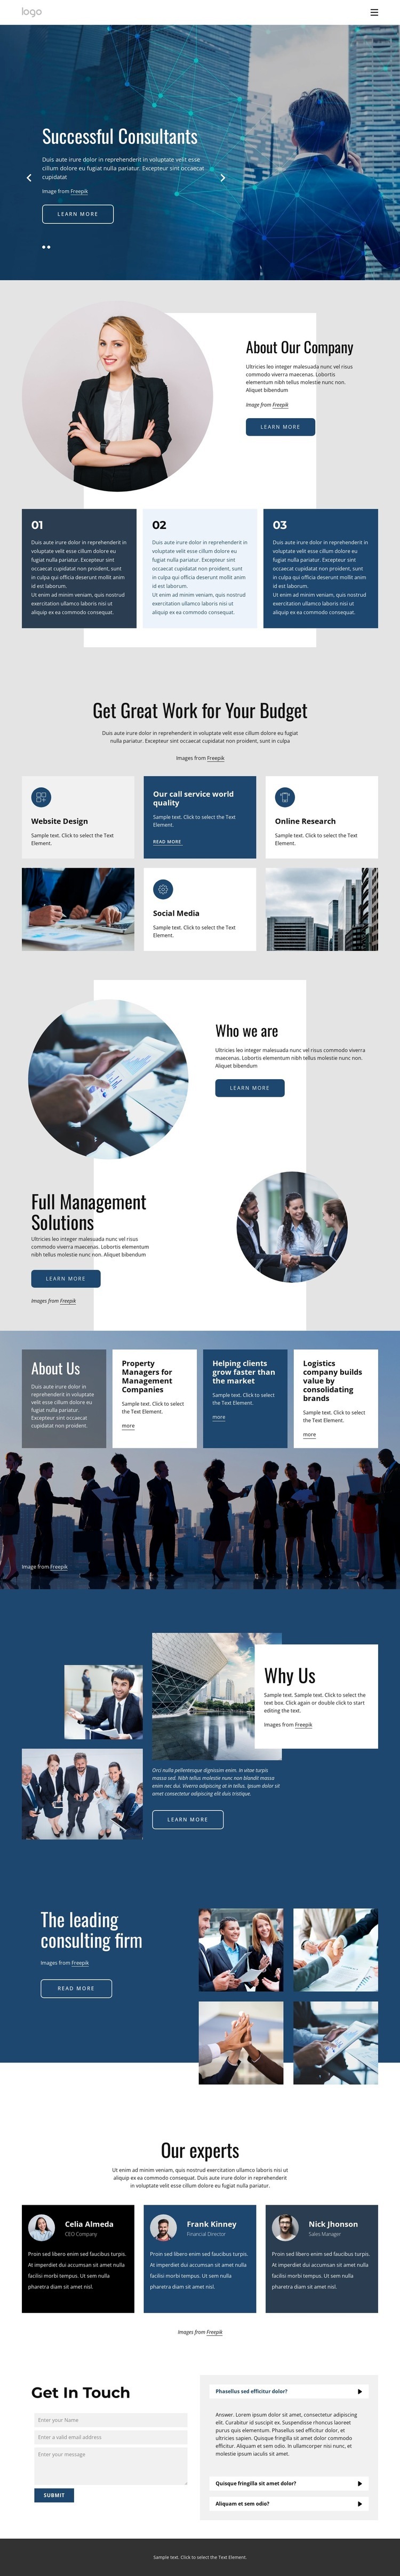 We offer tailored consulting services Web Page Design